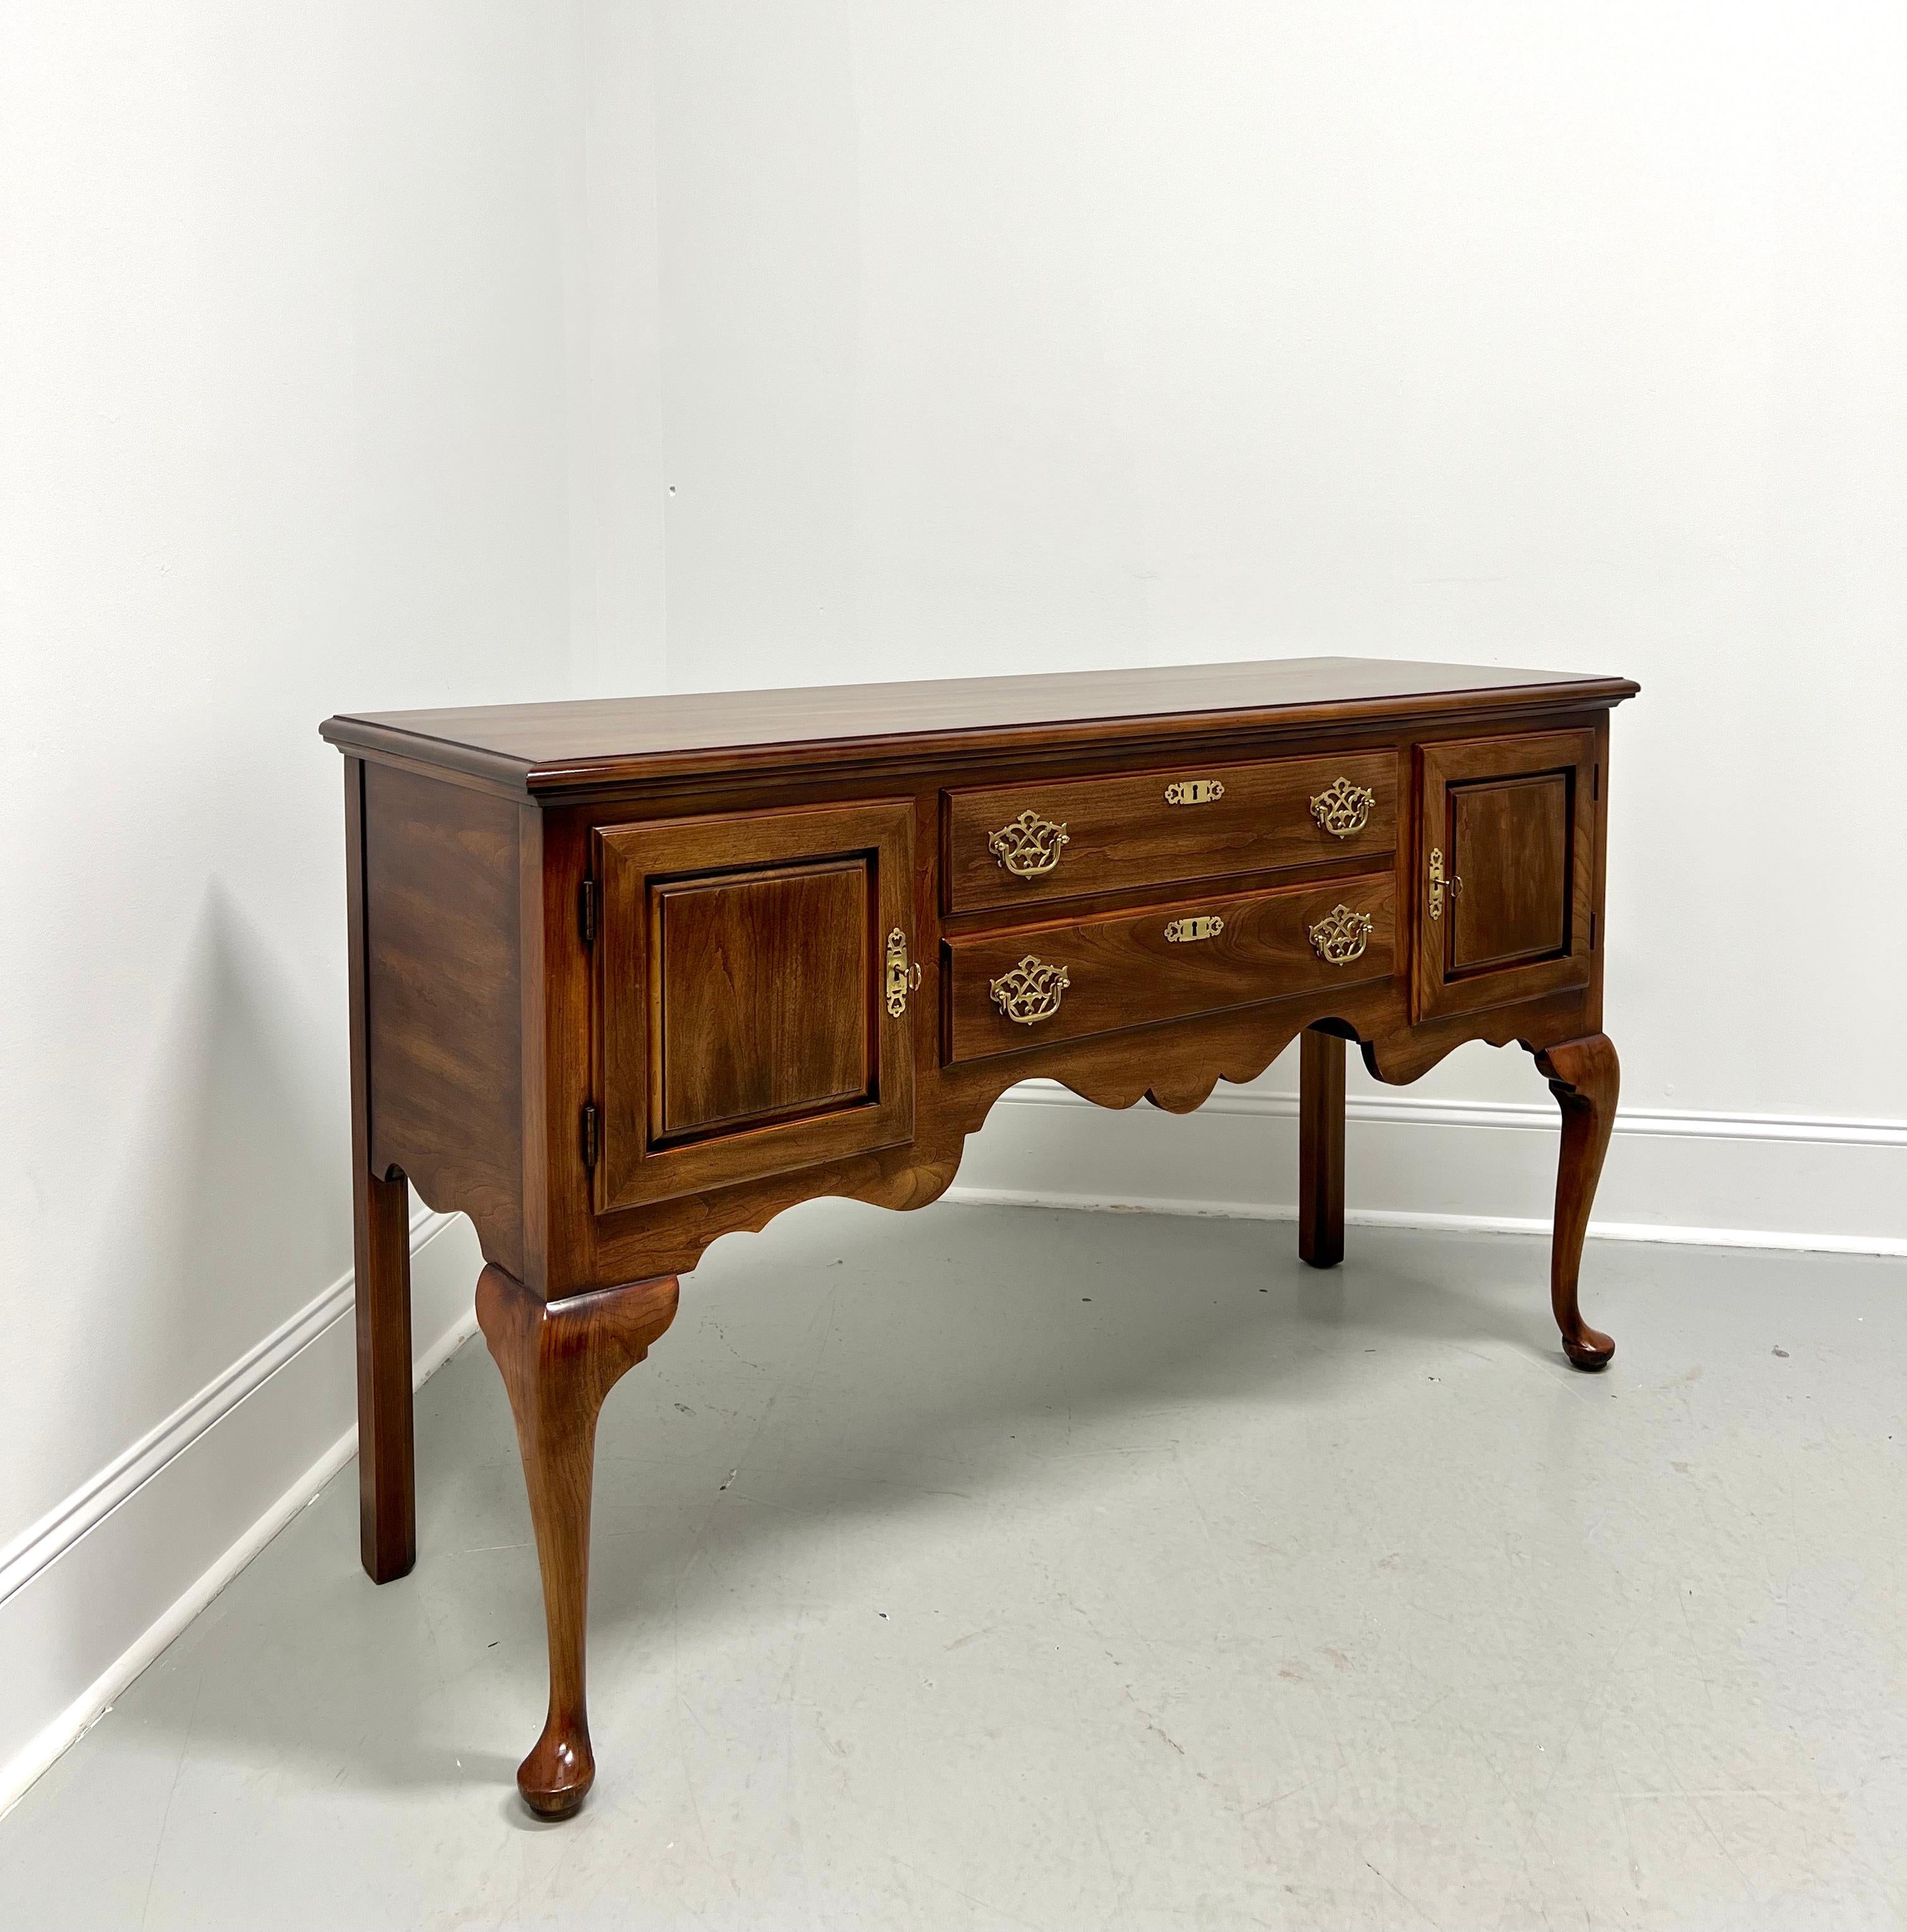 STATTON Trutype Americana Oxford Antique Cherry Queen Anne Huntboard Sideboard For Sale 8